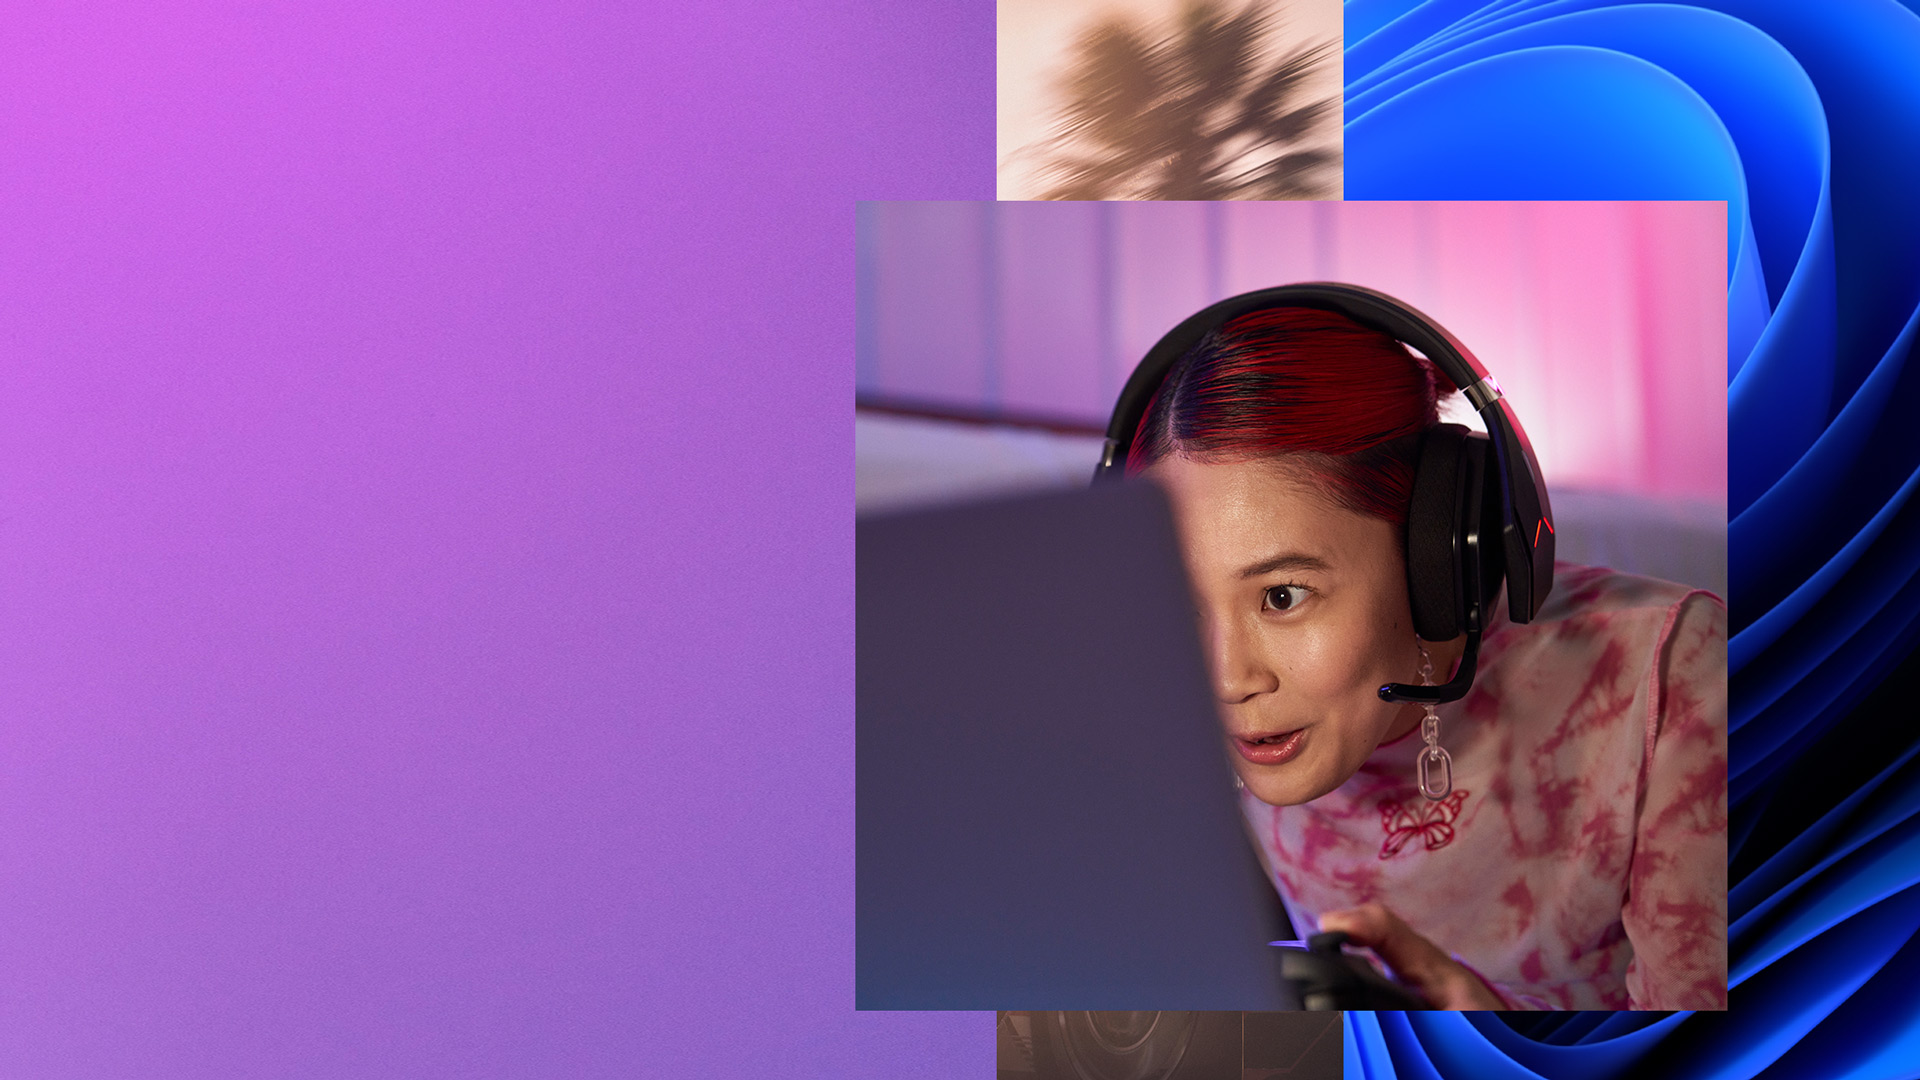 Girl wearing headphones with a controller in her hands looking at her computer screen